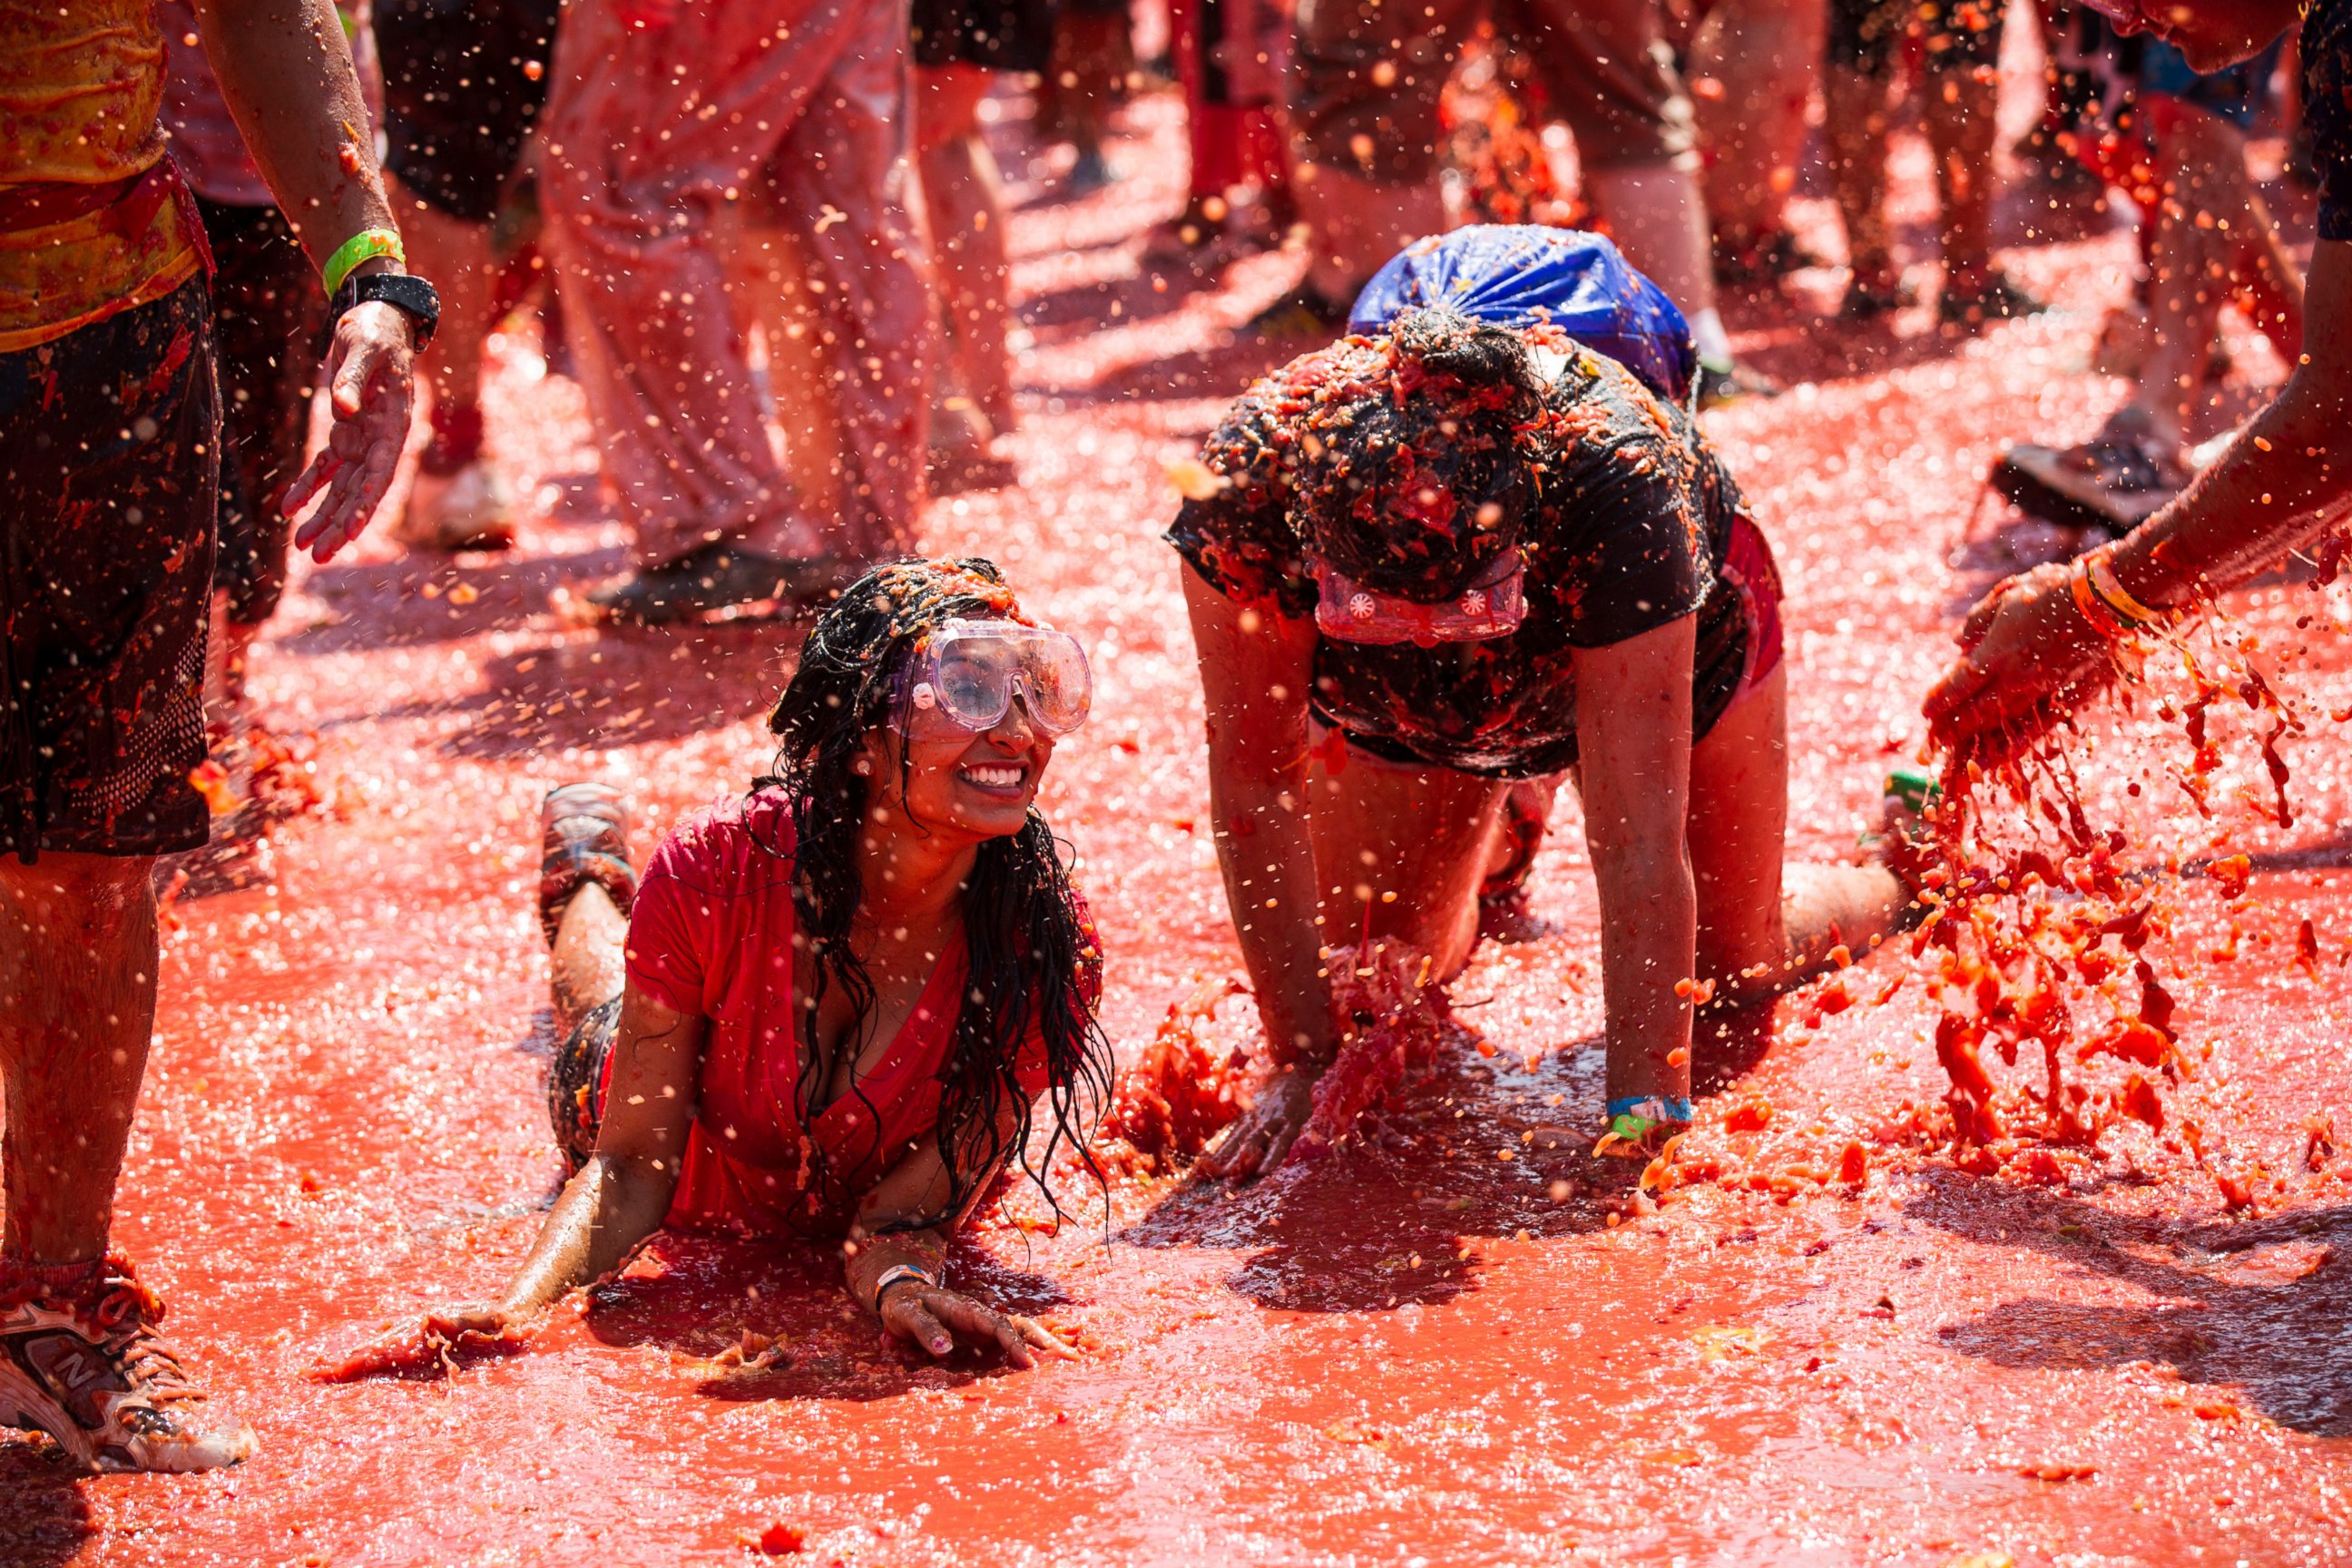 PHOTO: In addition to running with bulls, the festival features a food fight called "Tomato Royale," in the spirit of Spain's La Tomatina.